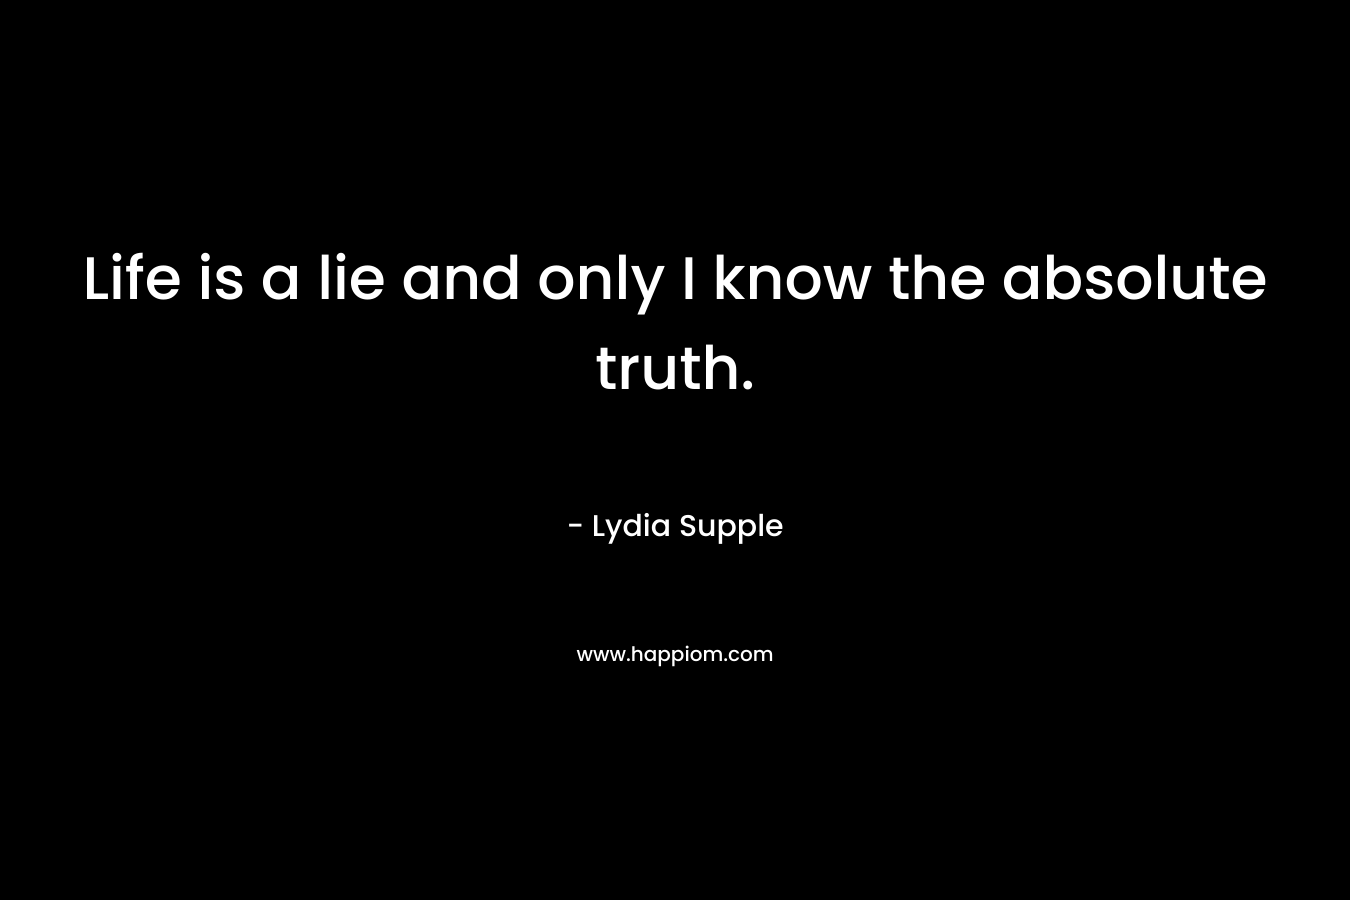 Life is a lie and only I know the absolute truth.